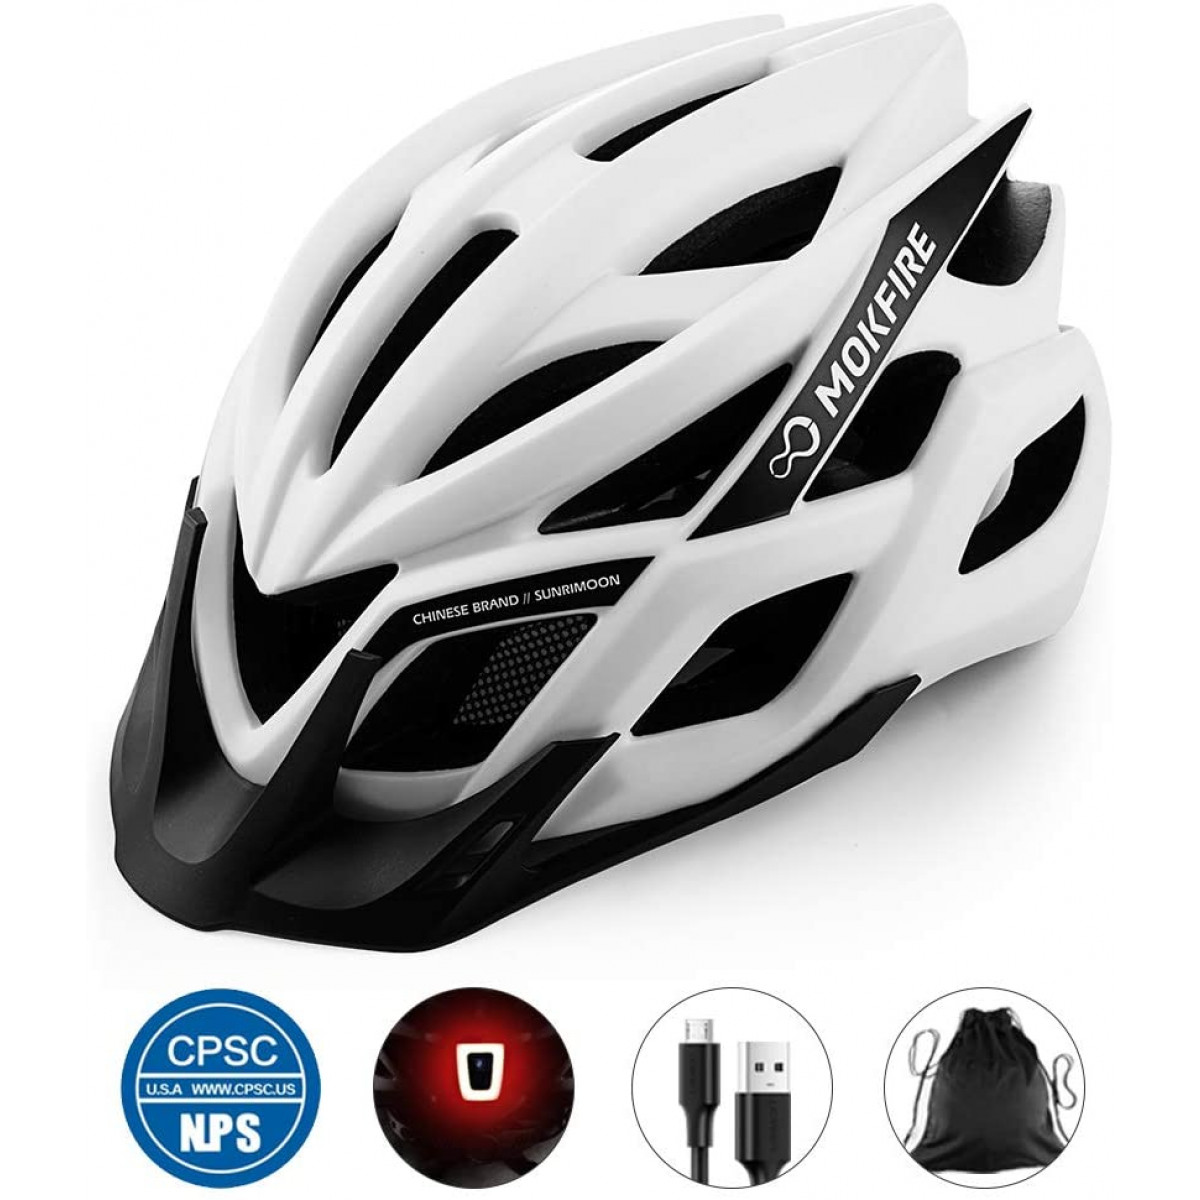 Bicycle & MOKFIRE Adult Bike Helmet CPSC Certified with Rechargeable USB Light 